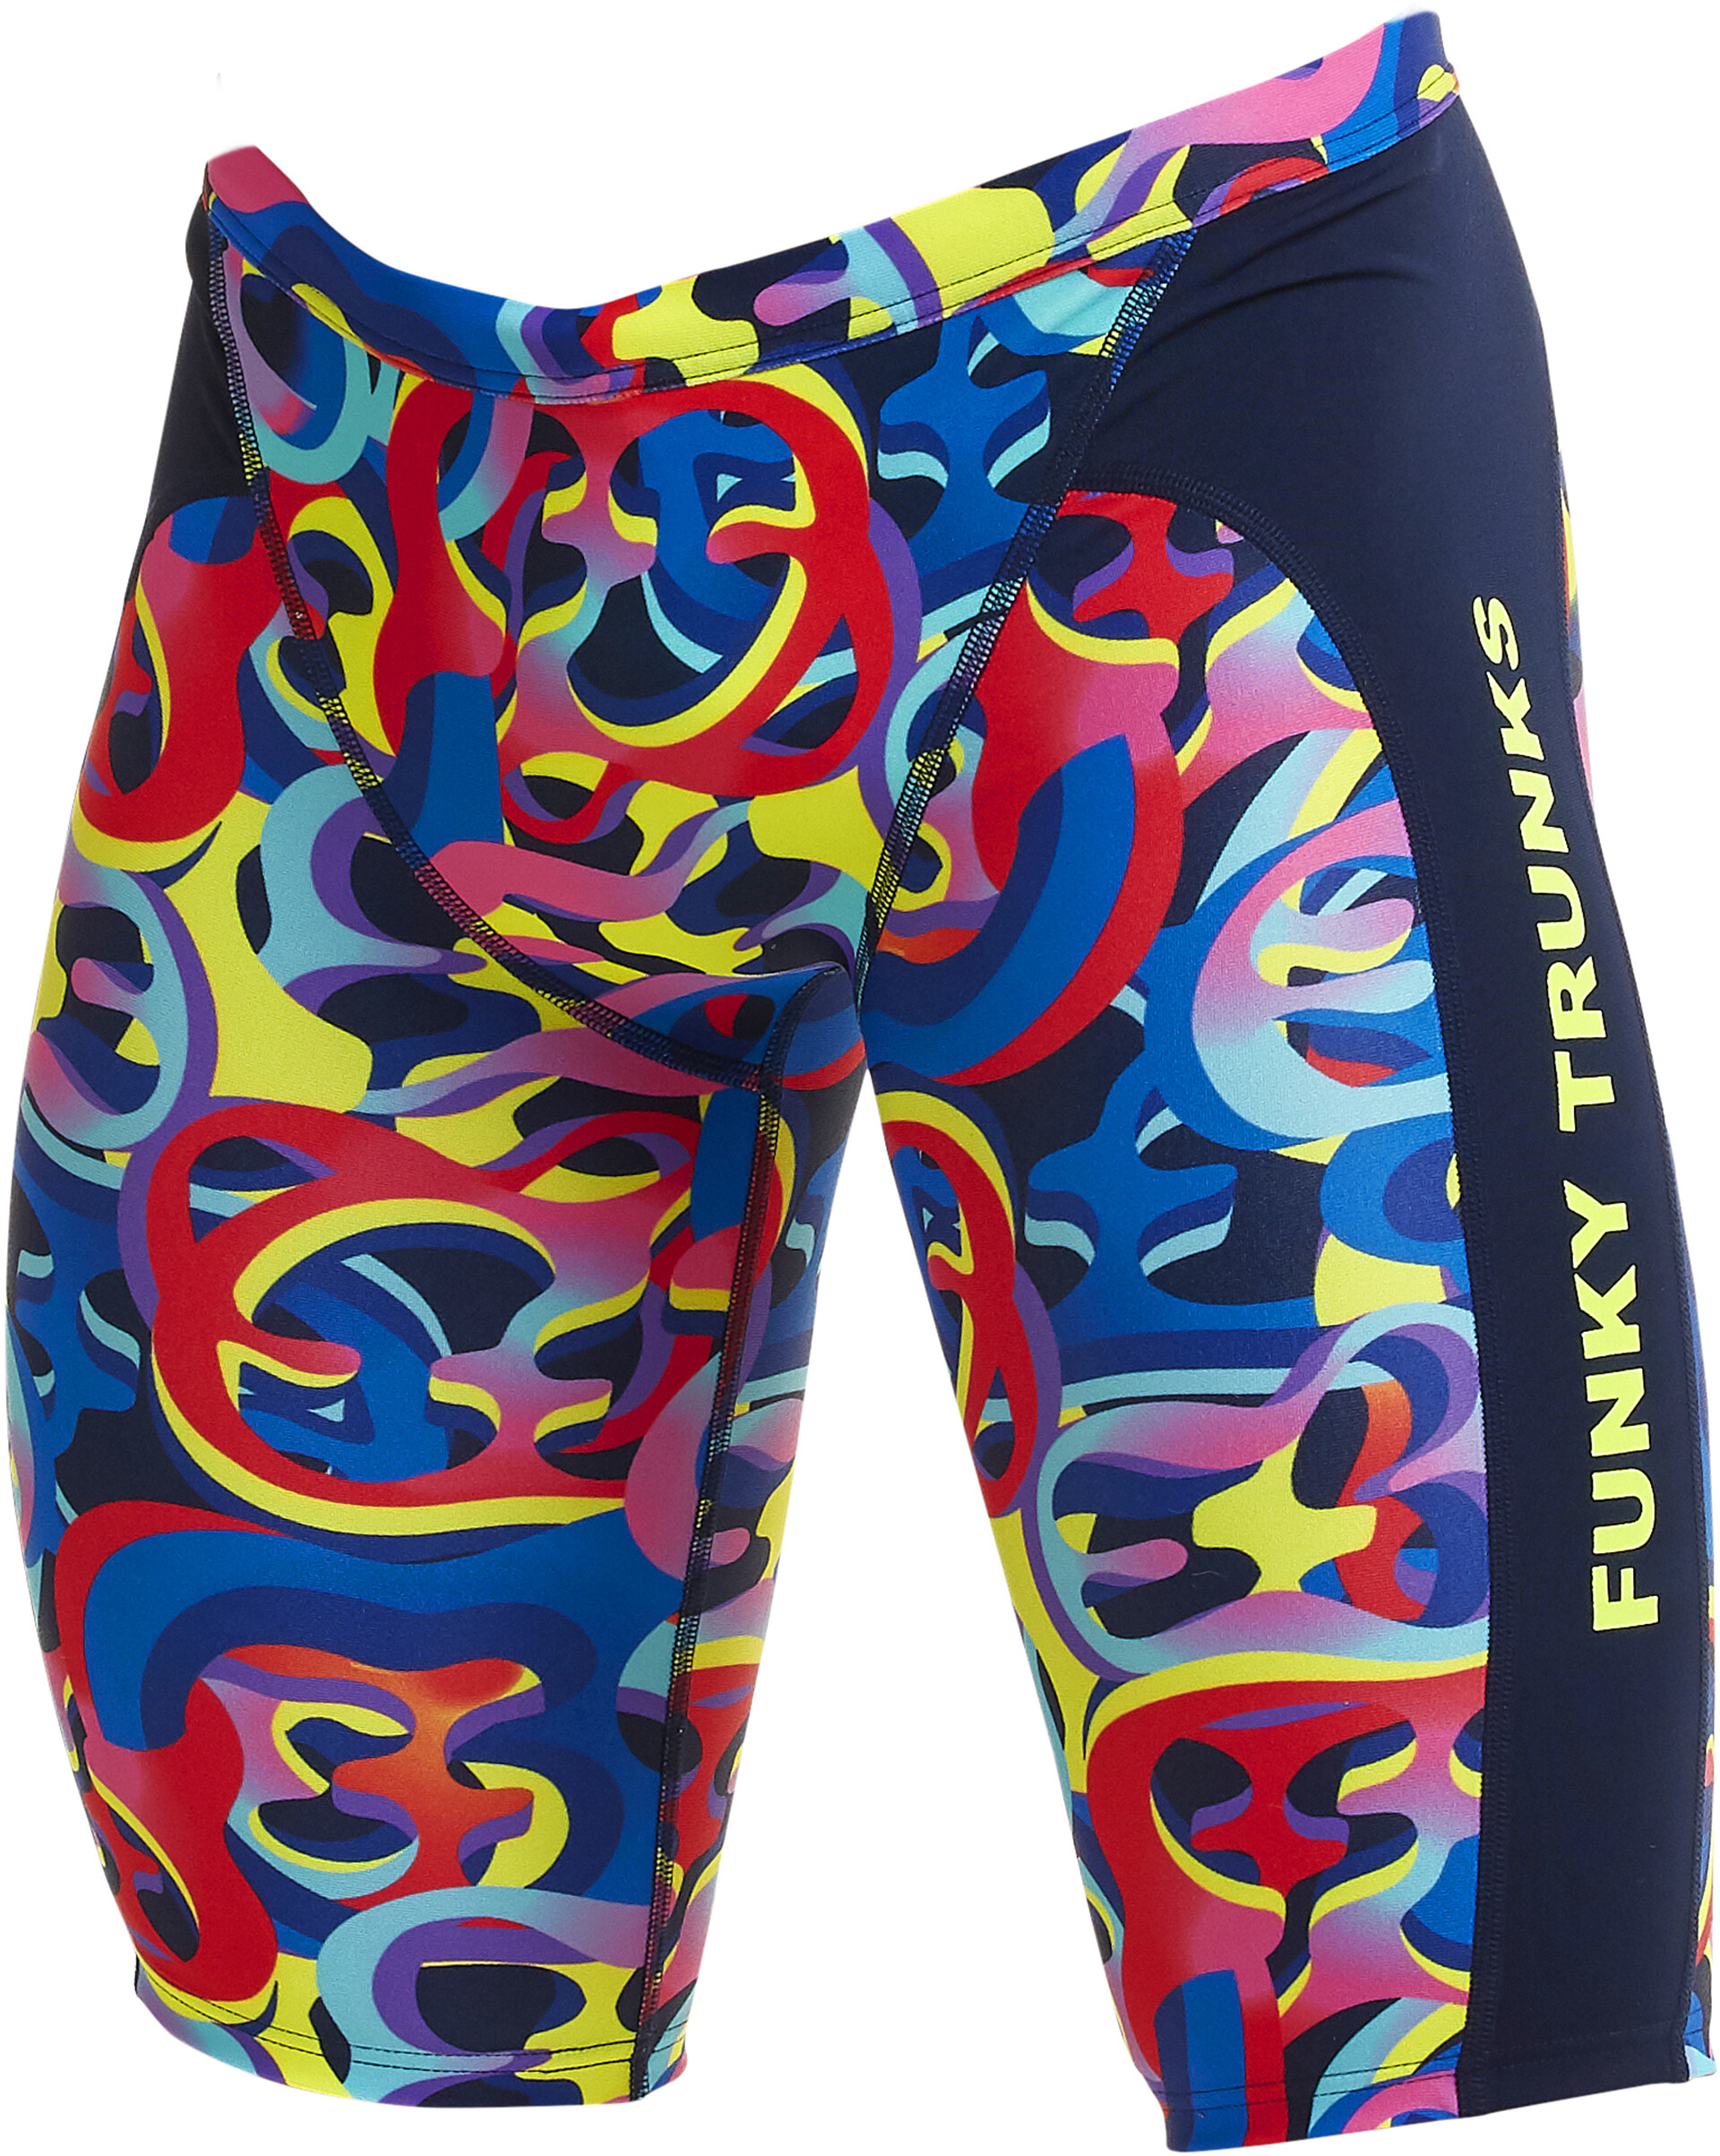 Funky Trunks Training Jammers Men organica | Addnature.co.uk